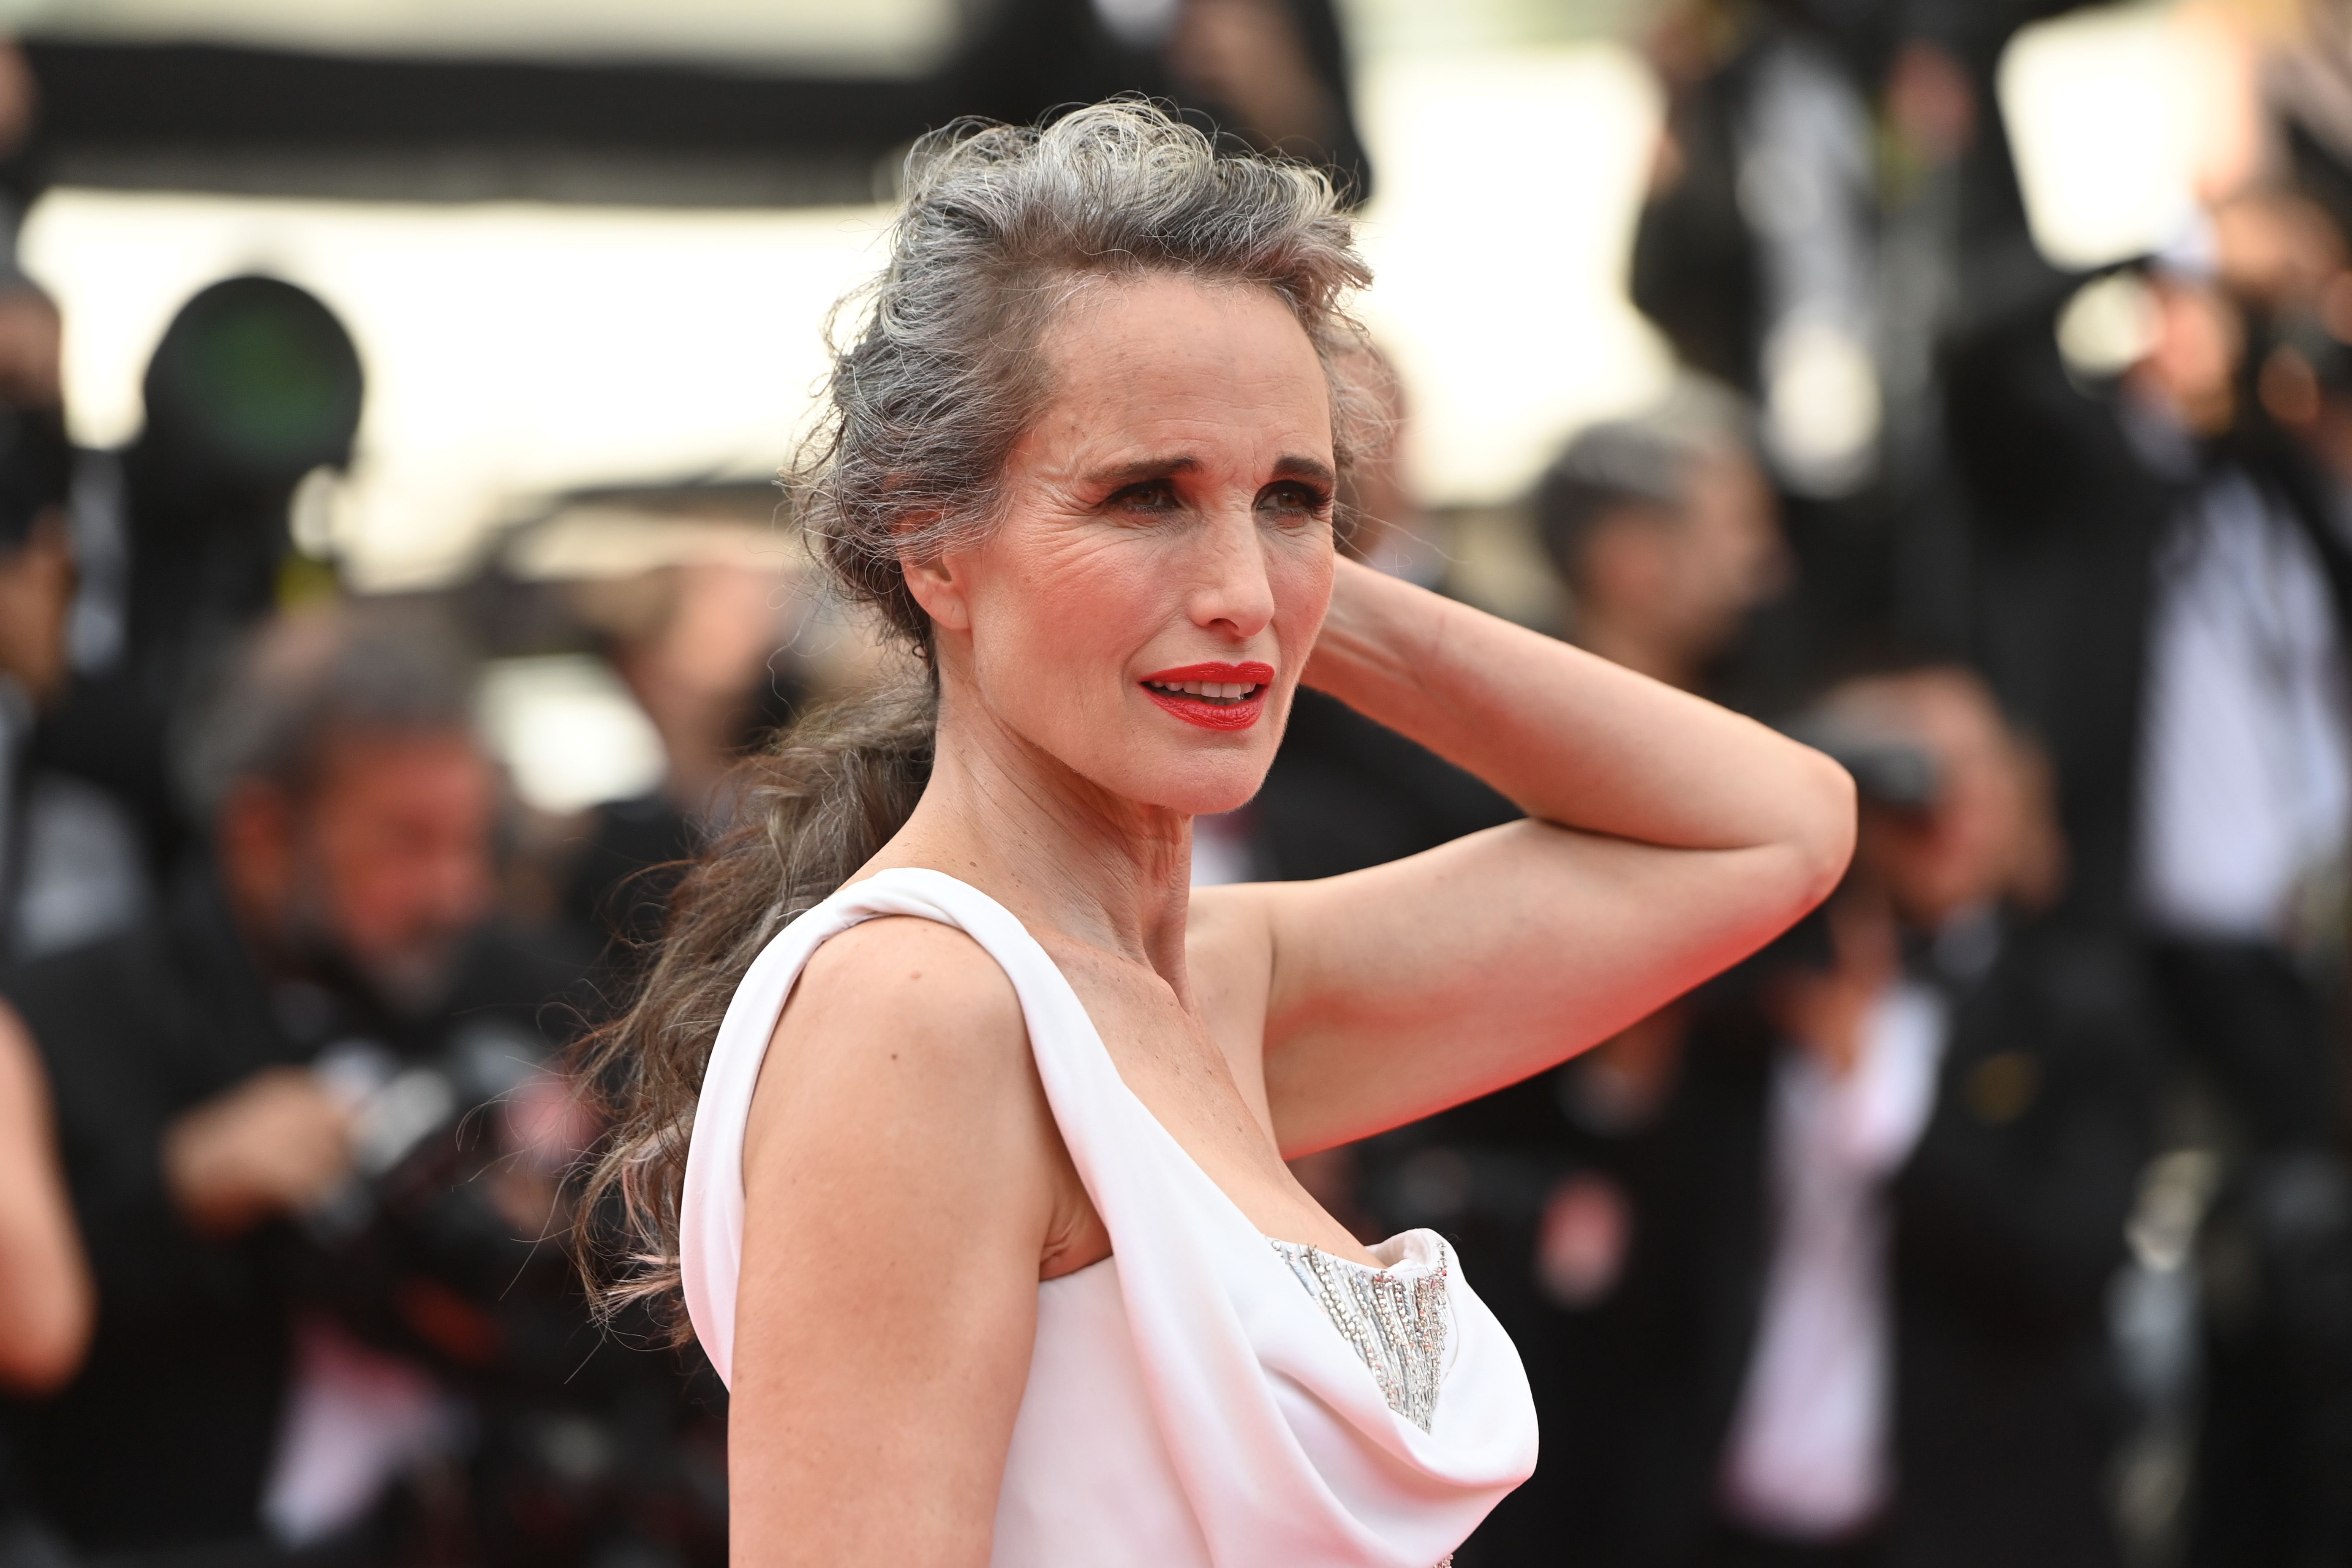 Andie Macdowell on Aging Ive Never Felt More Beautiful image picture